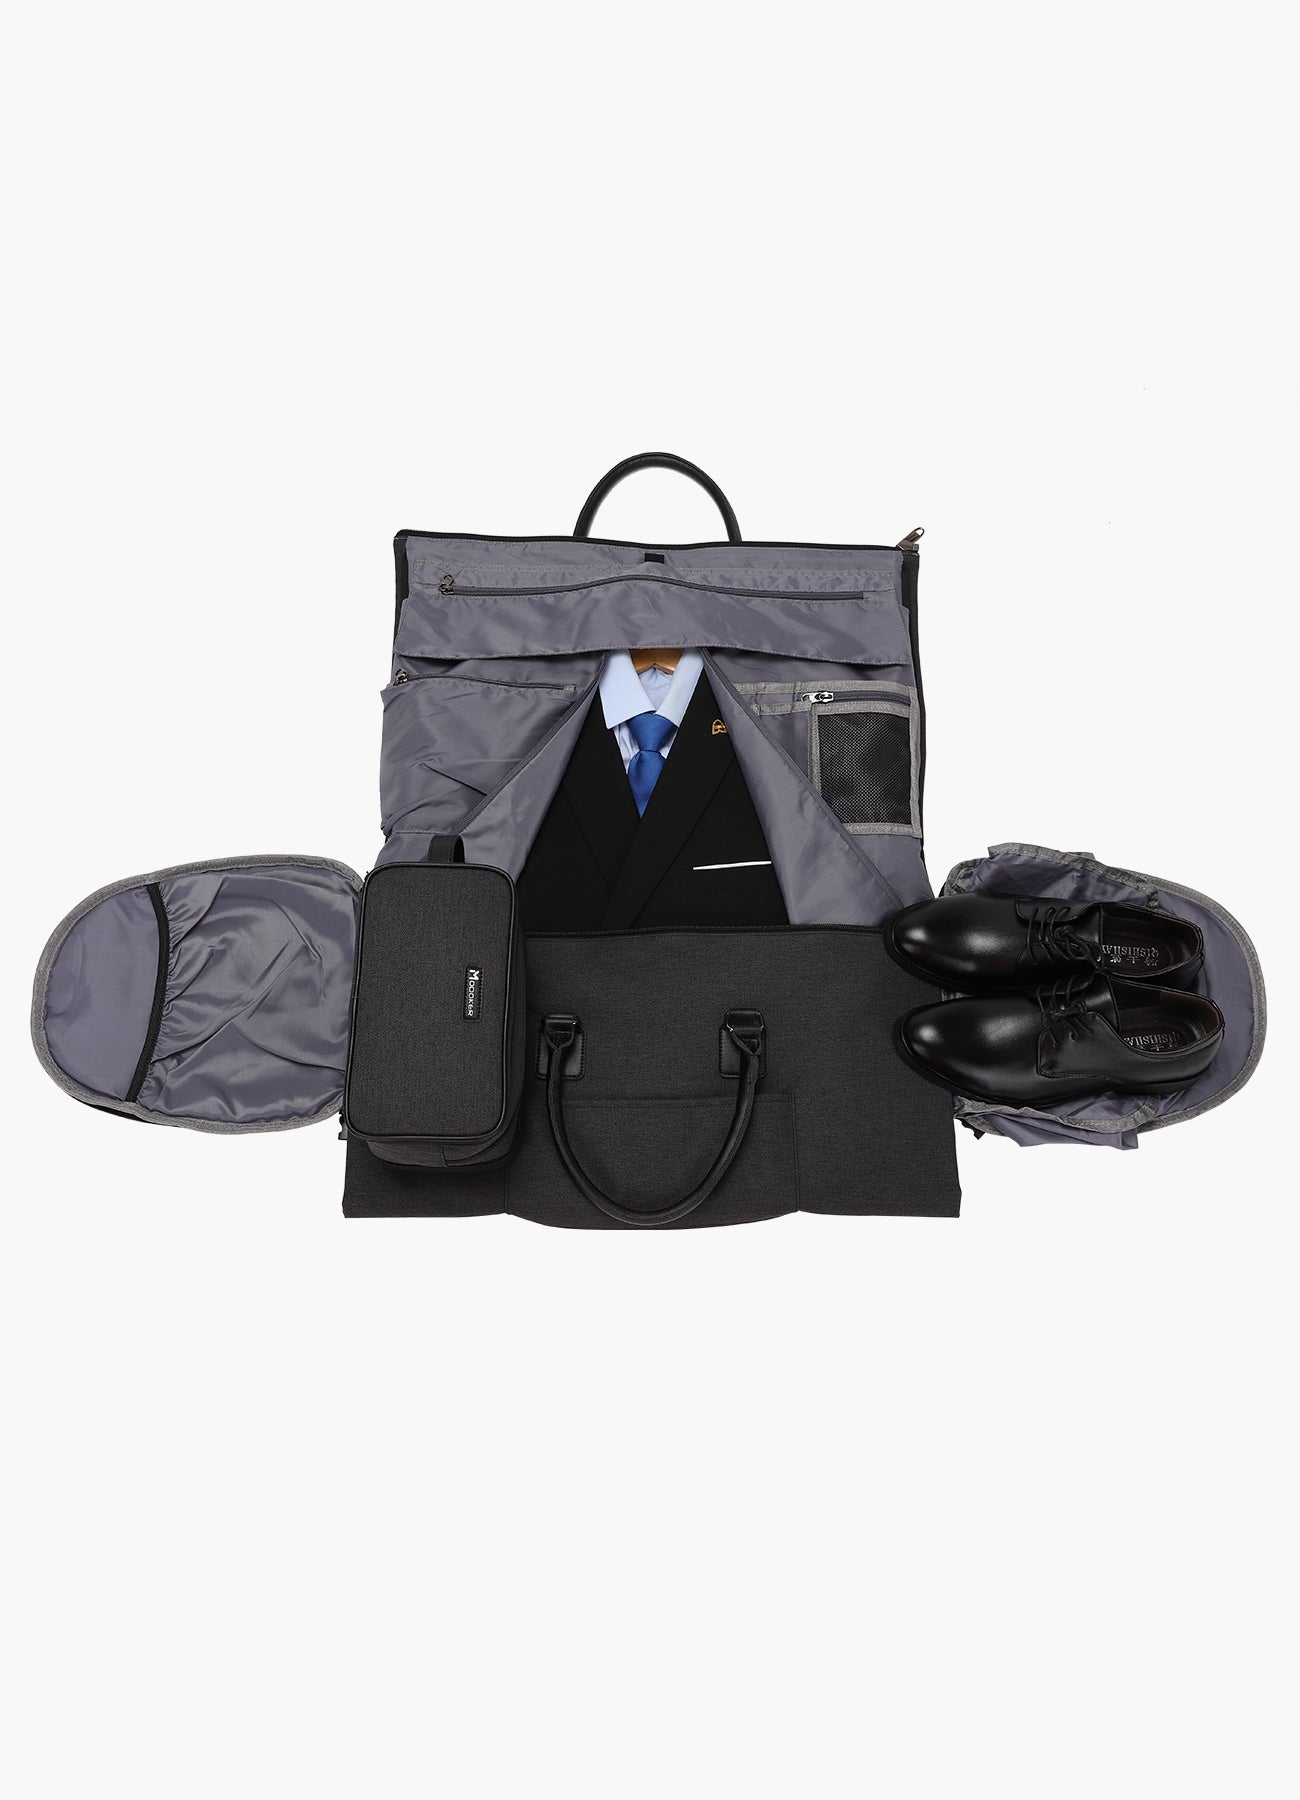 Convertible Garment Bag with Toiletry Bag  For Travel